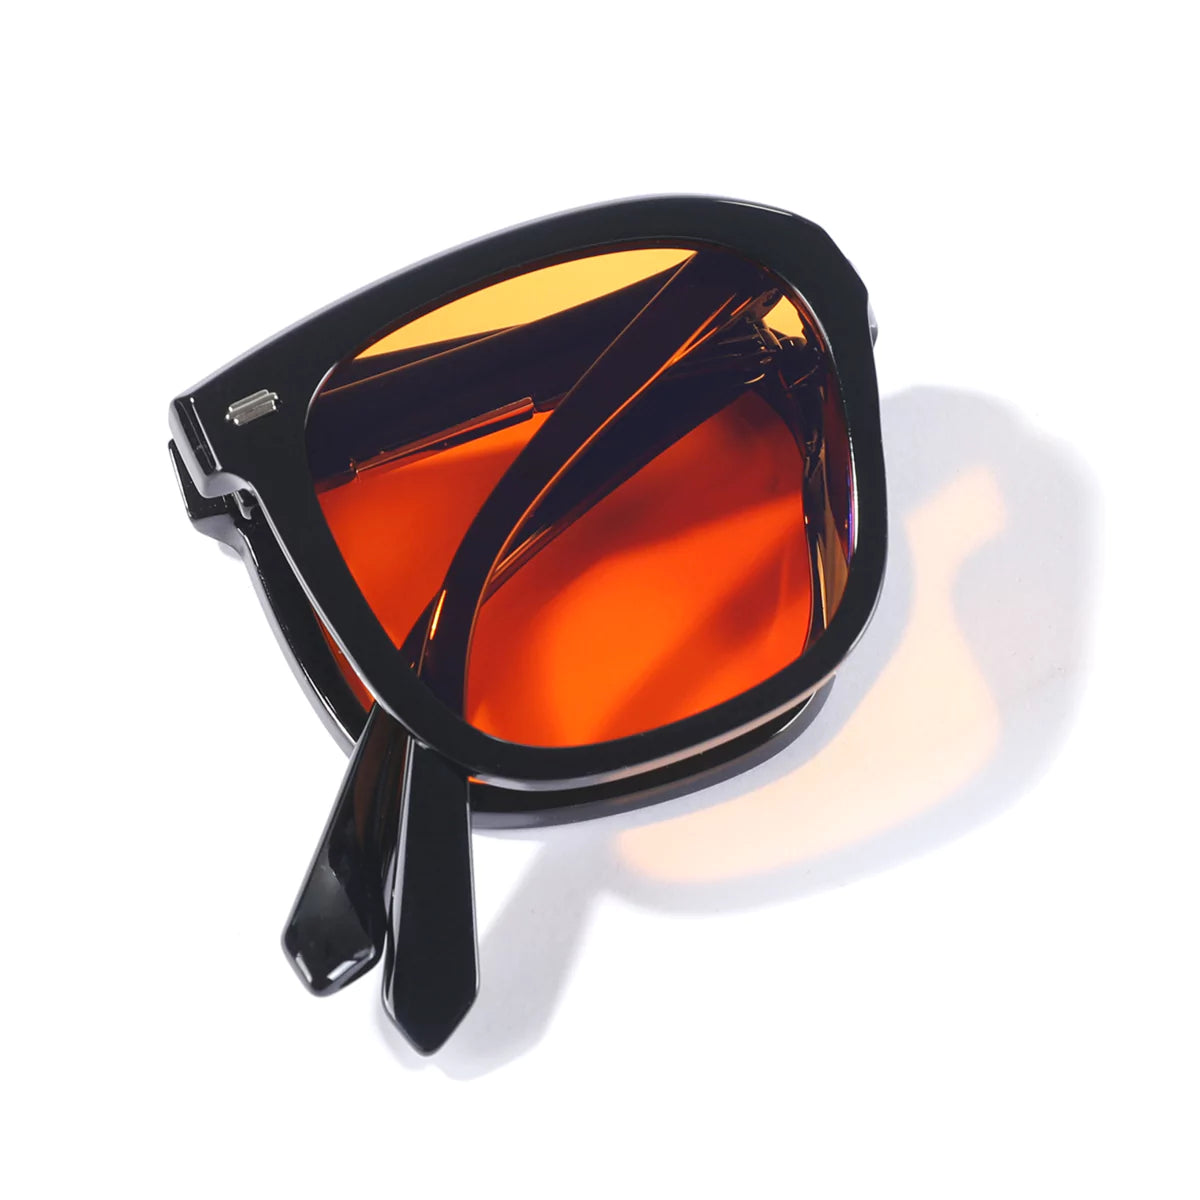 A pair of black-framed sunglasses with orange lenses on a white background.